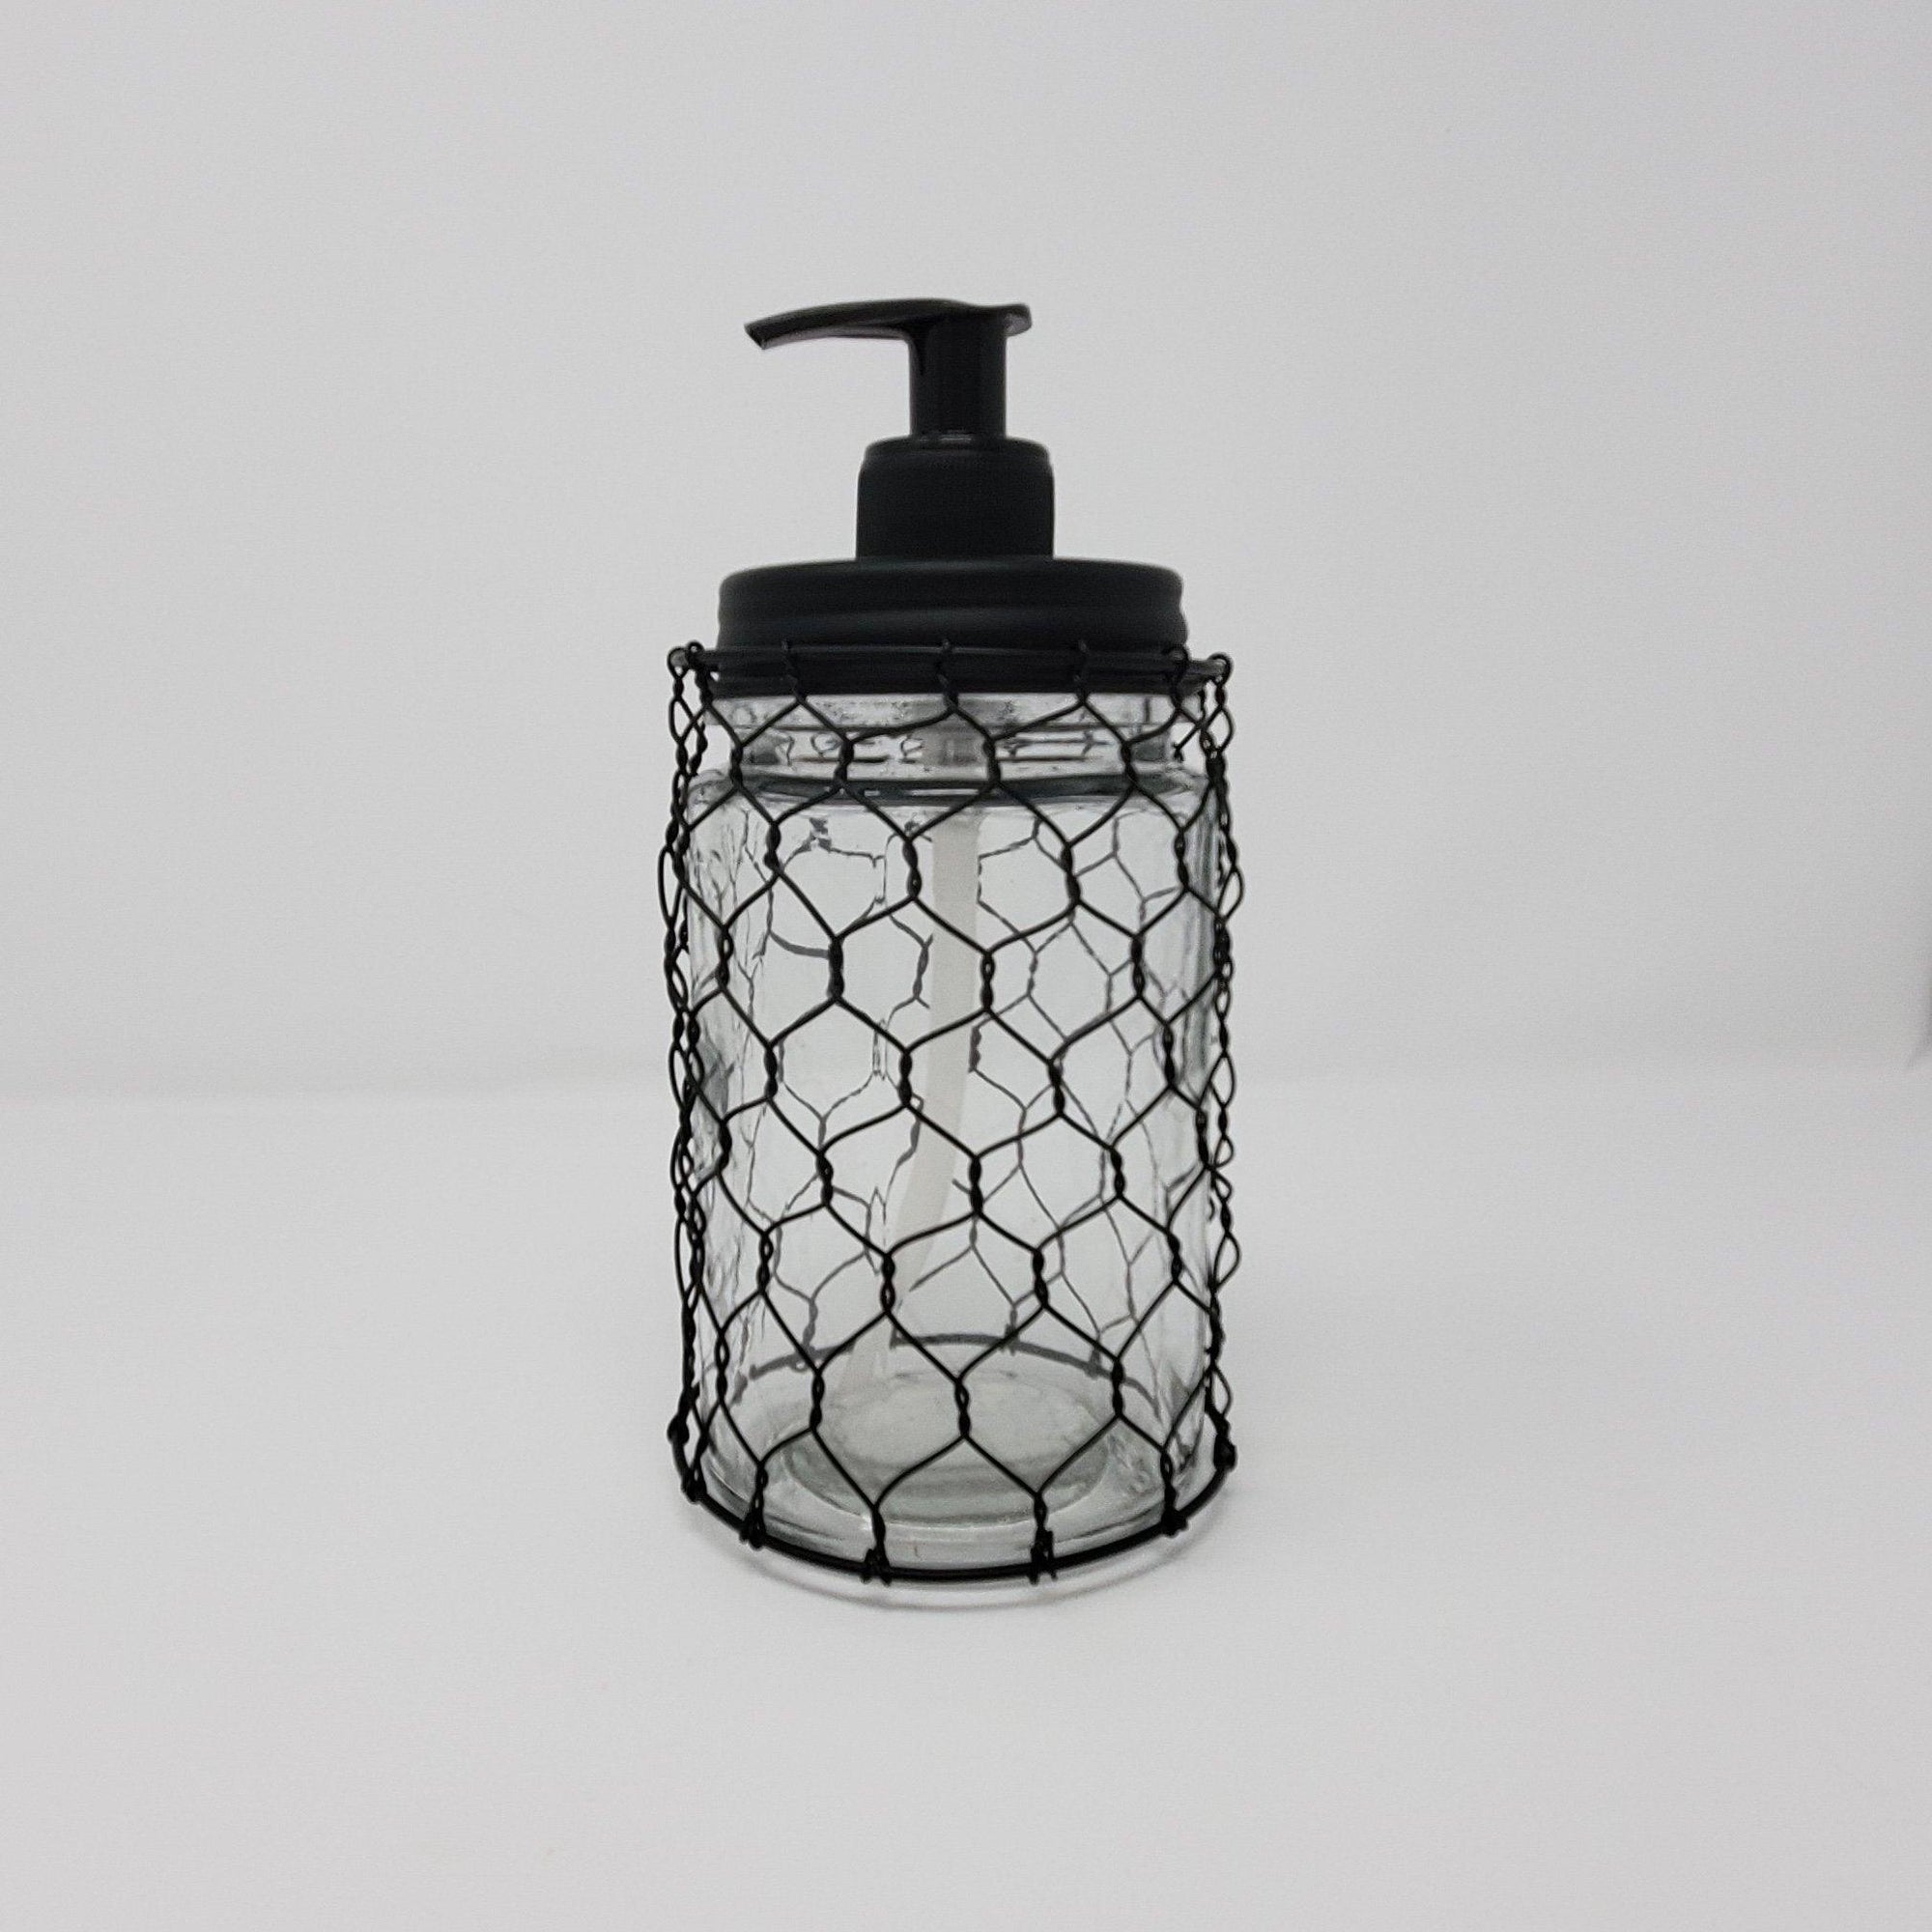 Farmhouse Kitchen Soap Dispenser with Chicken Wire with Black Pump - A Rustic Feeling